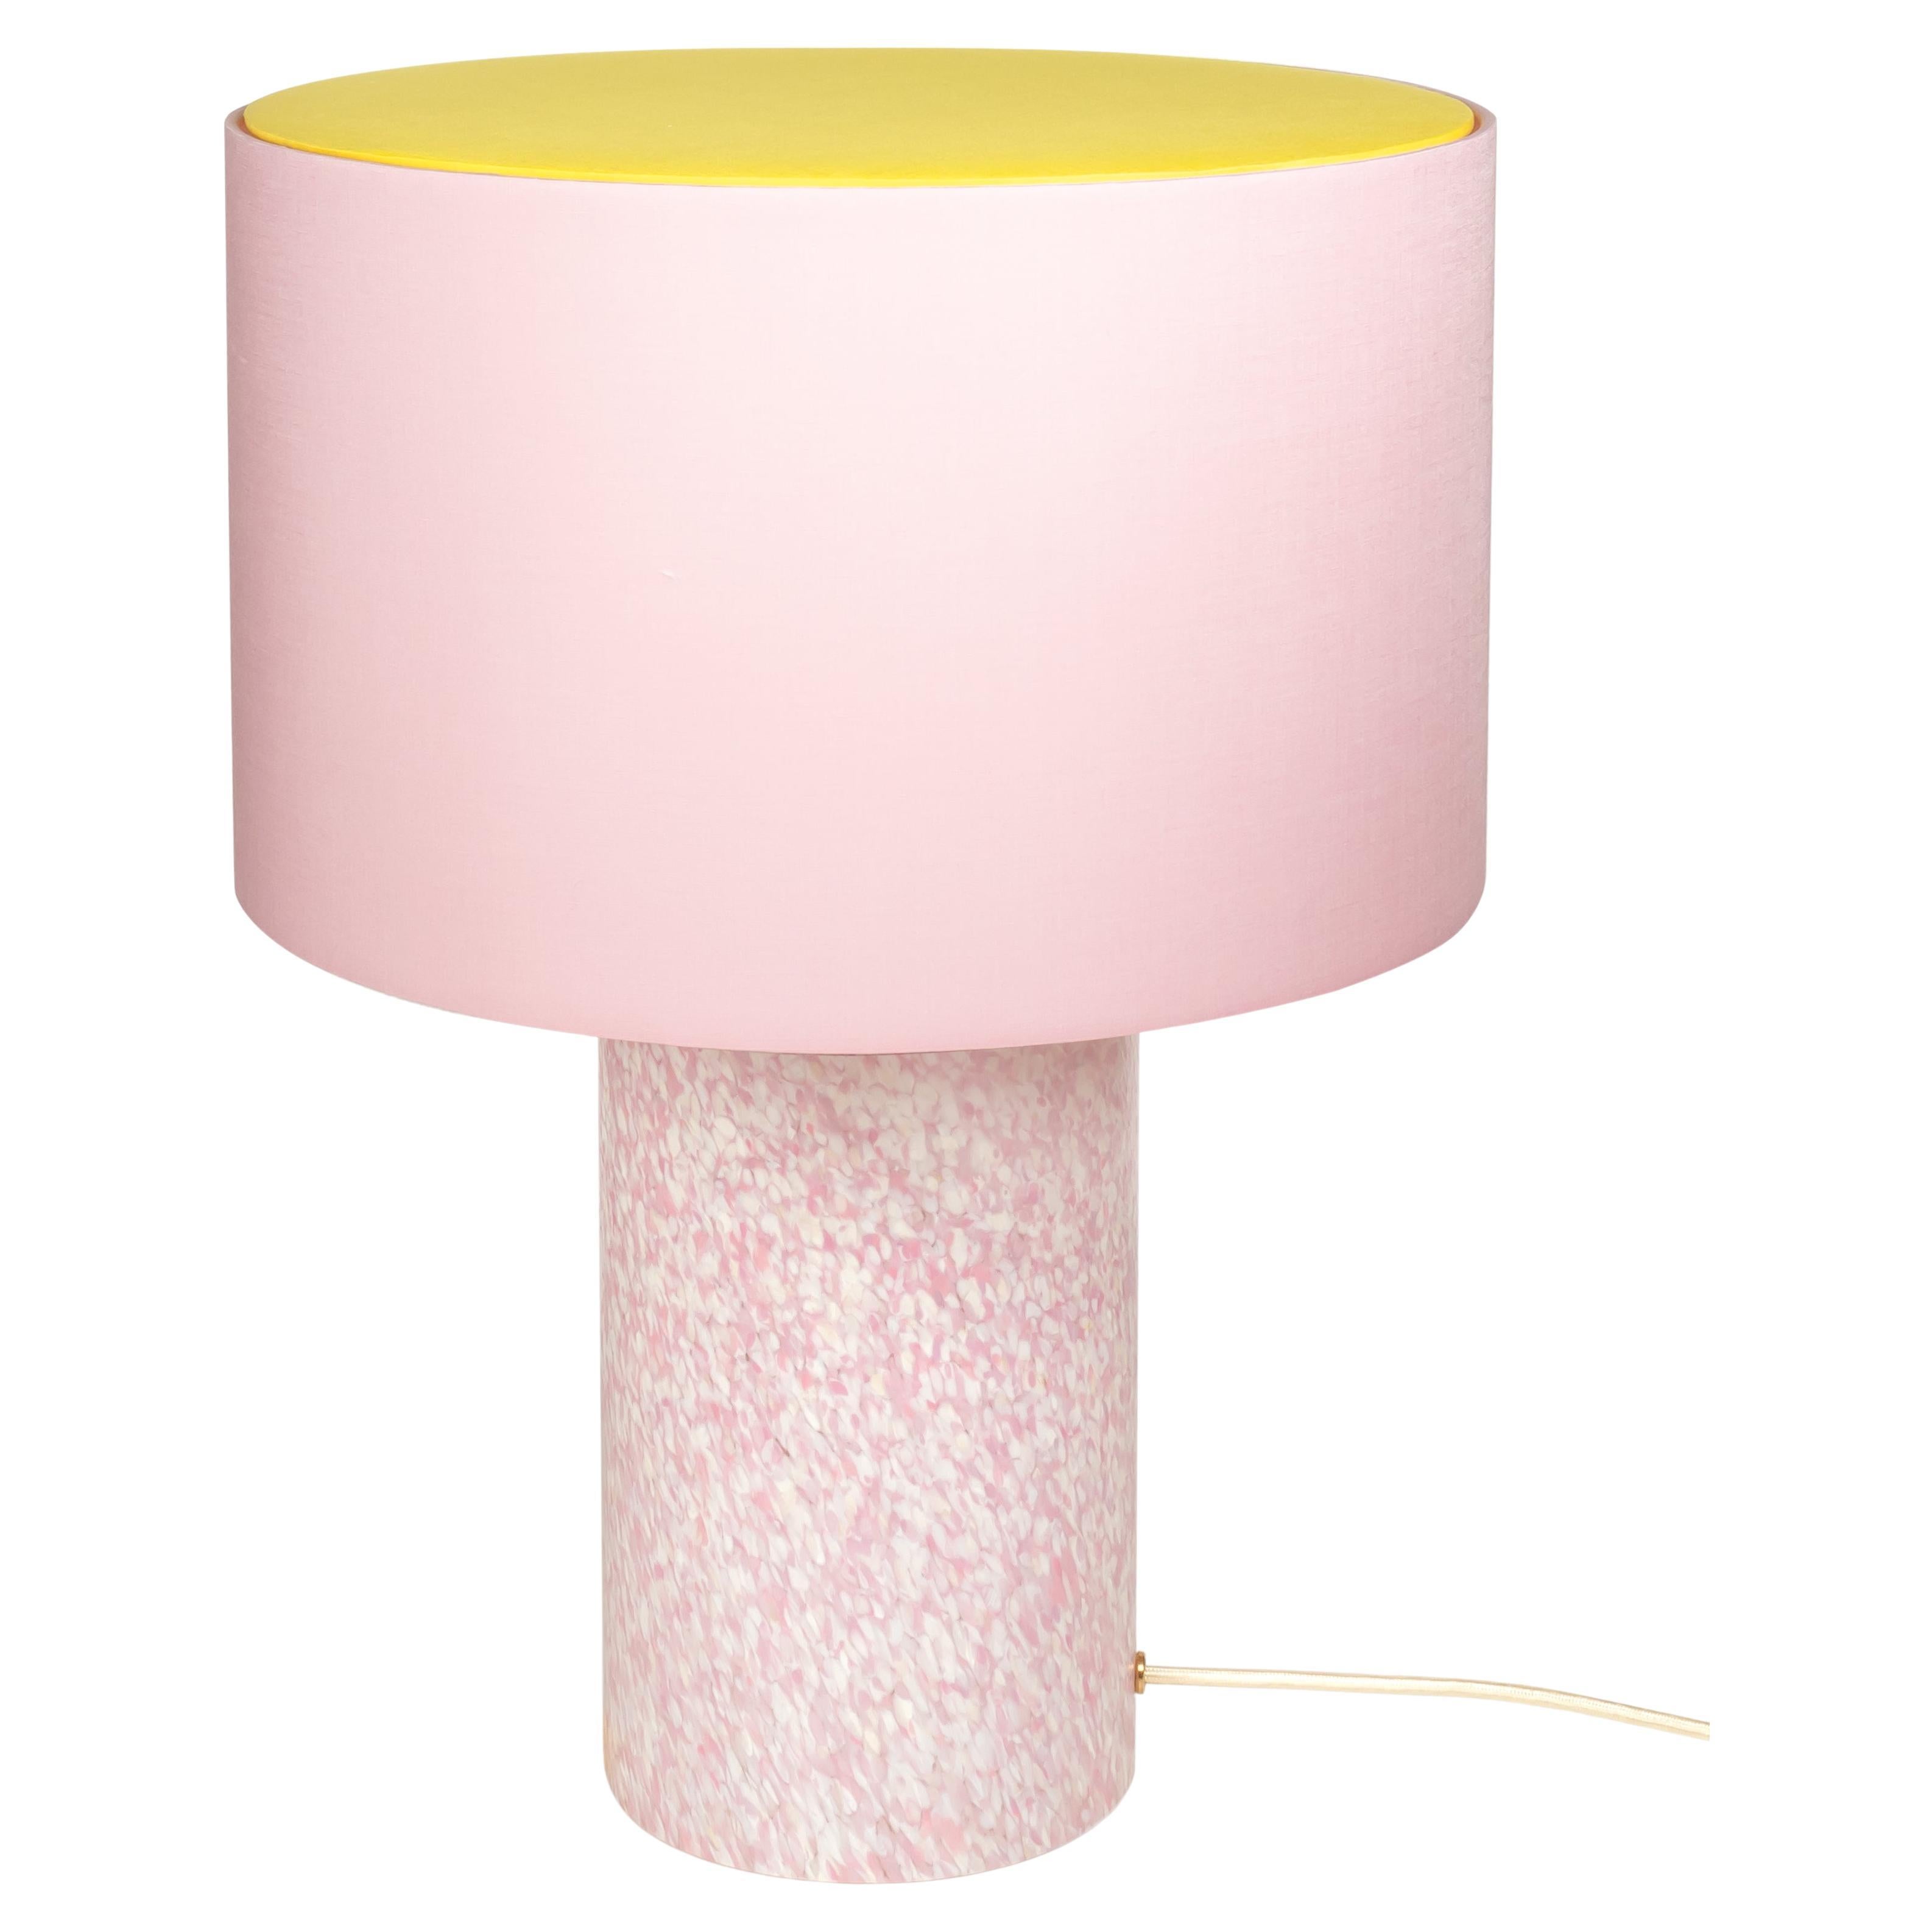 Murano Glass Ivory & Pink Pillar Lamp with Cotton Lampshade by Stories of Italy For Sale